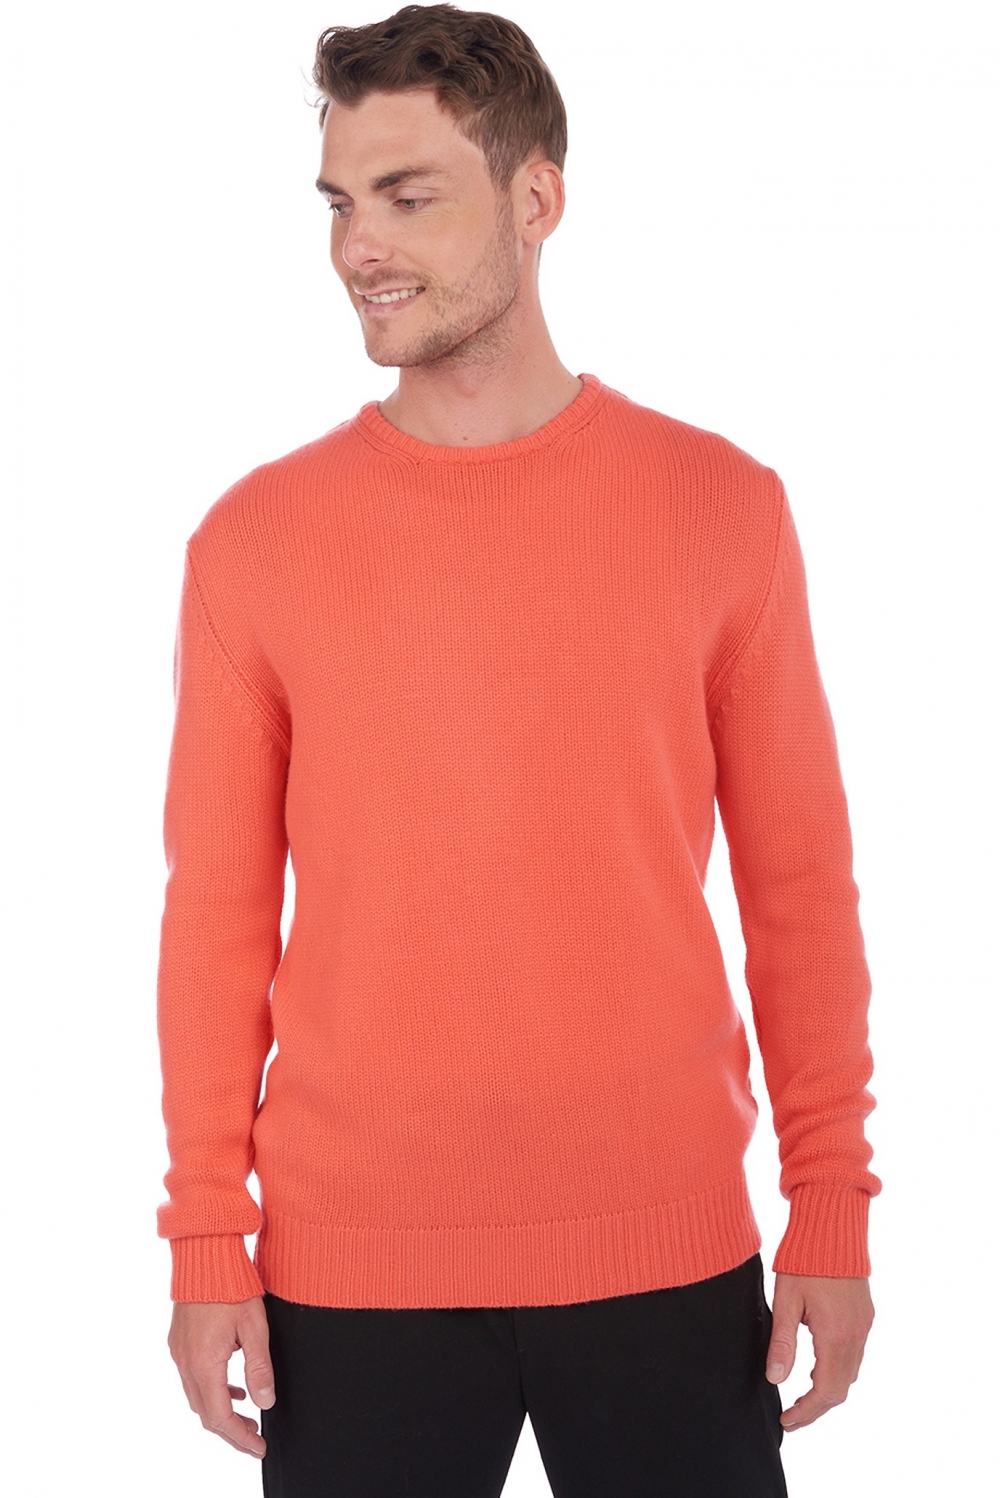 Cachemire pull homme col rond bilal corail lumineux m